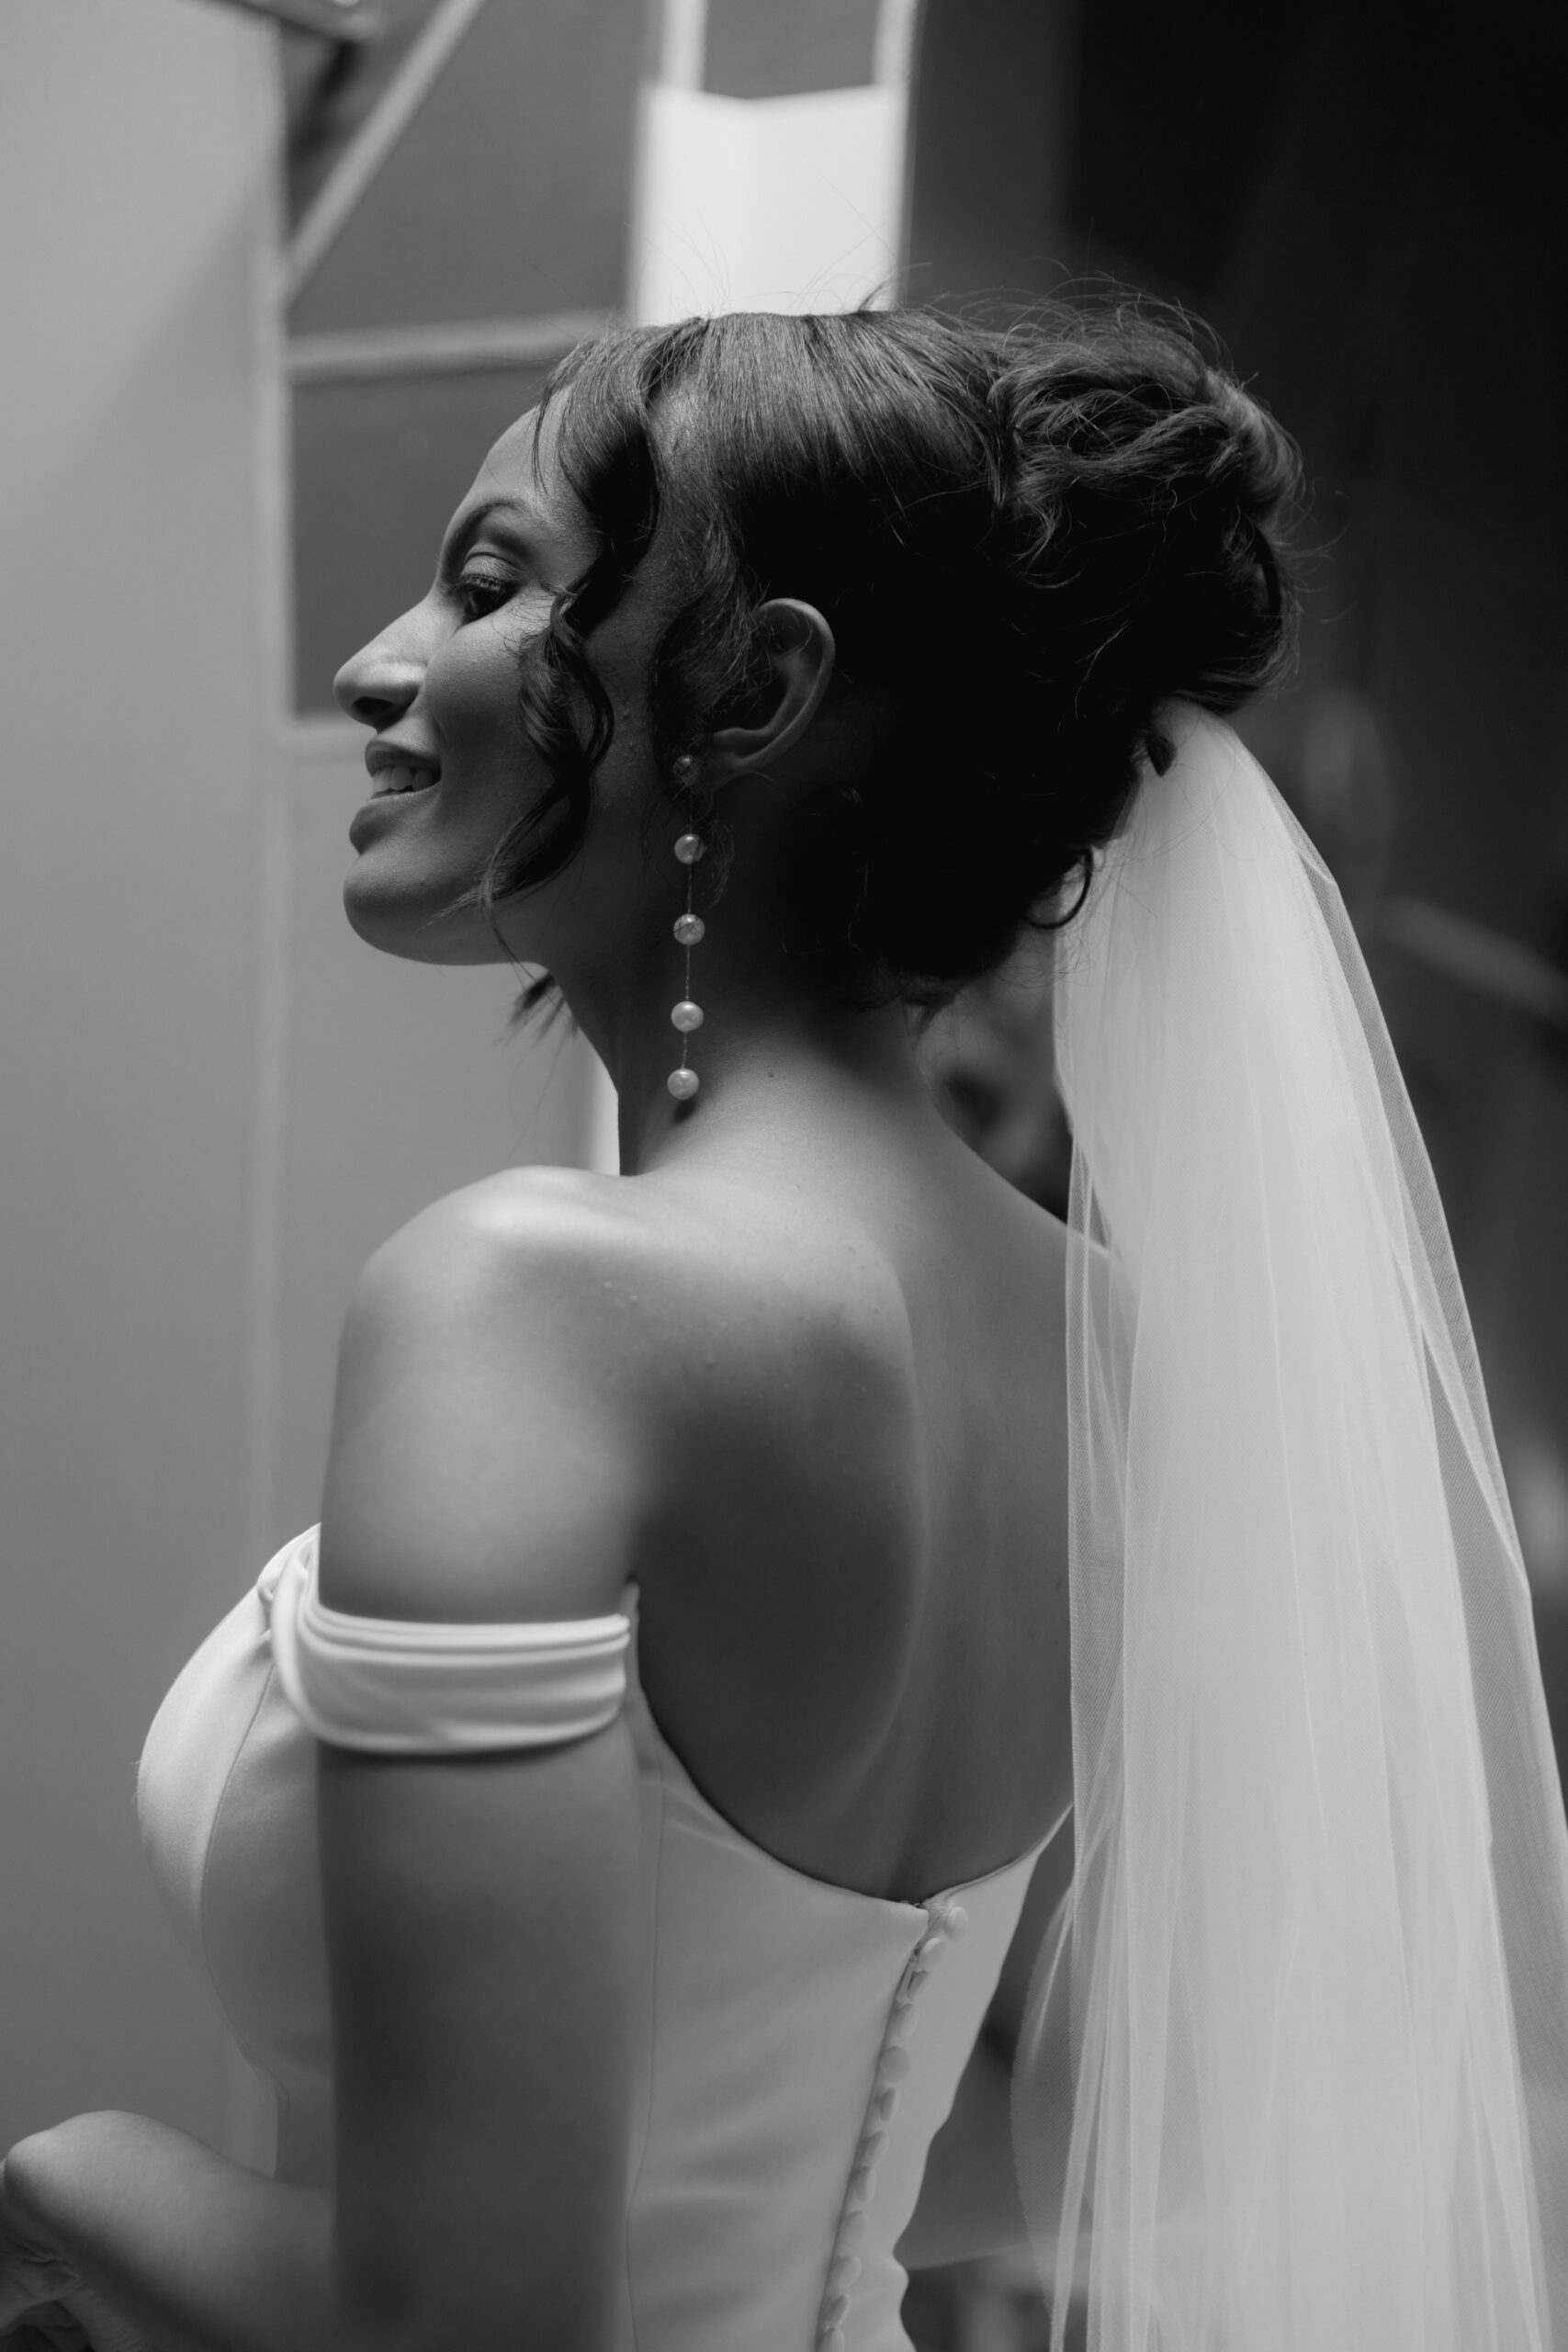 close up black and white photo of Black bride's side profile looking at her mom before wedding ceremony